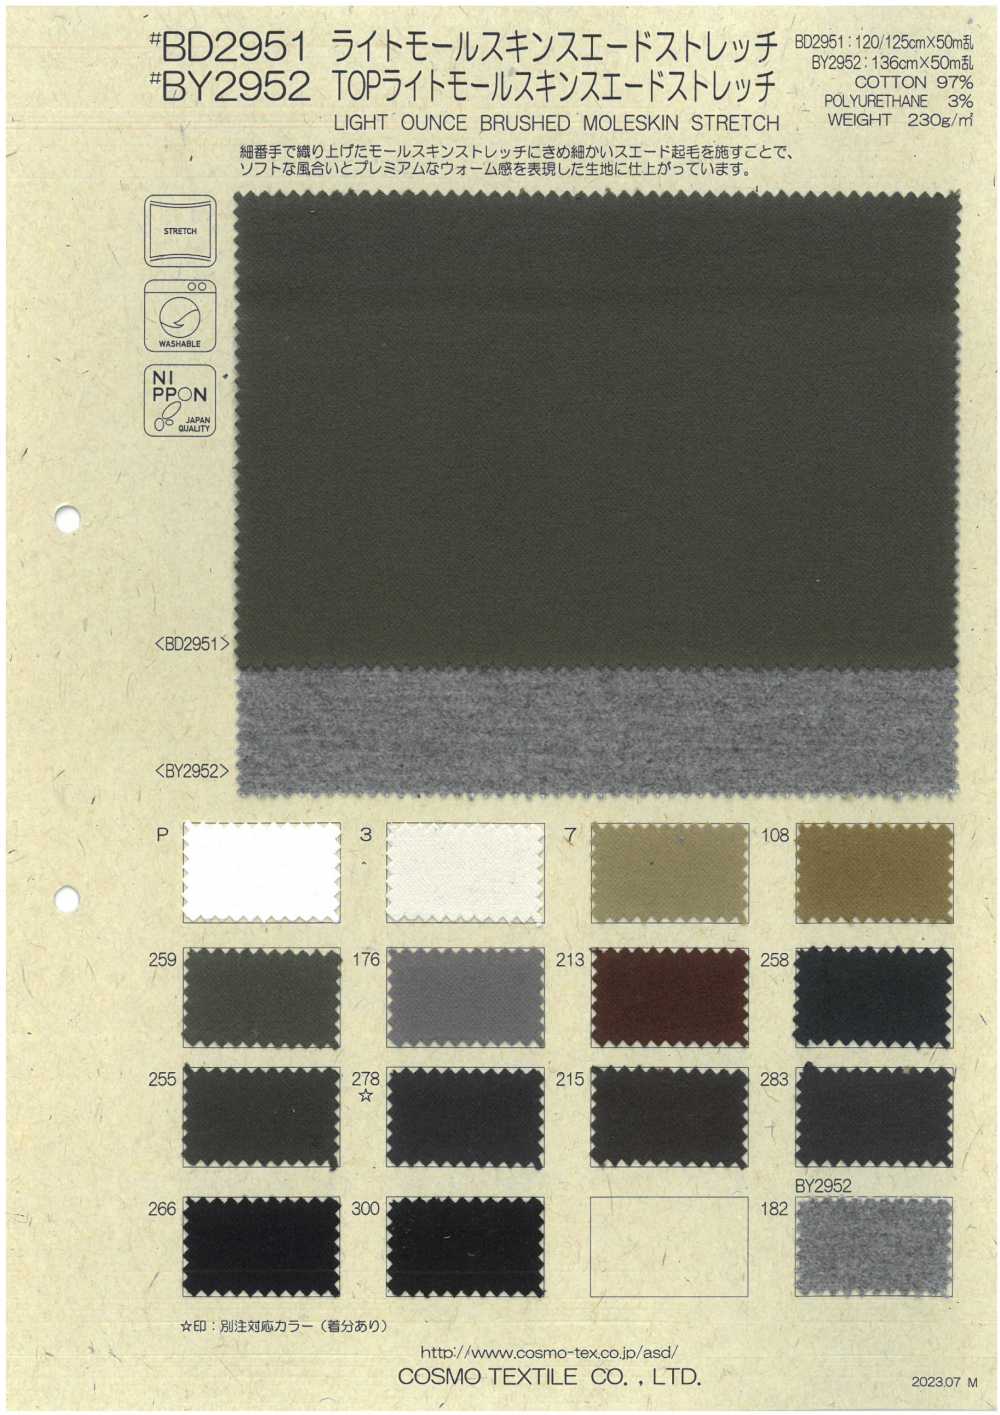 BY2952 Light Moleskin Stretch PTJ Recommended Part Number[Textile / Fabric] COSMO TEXTILE